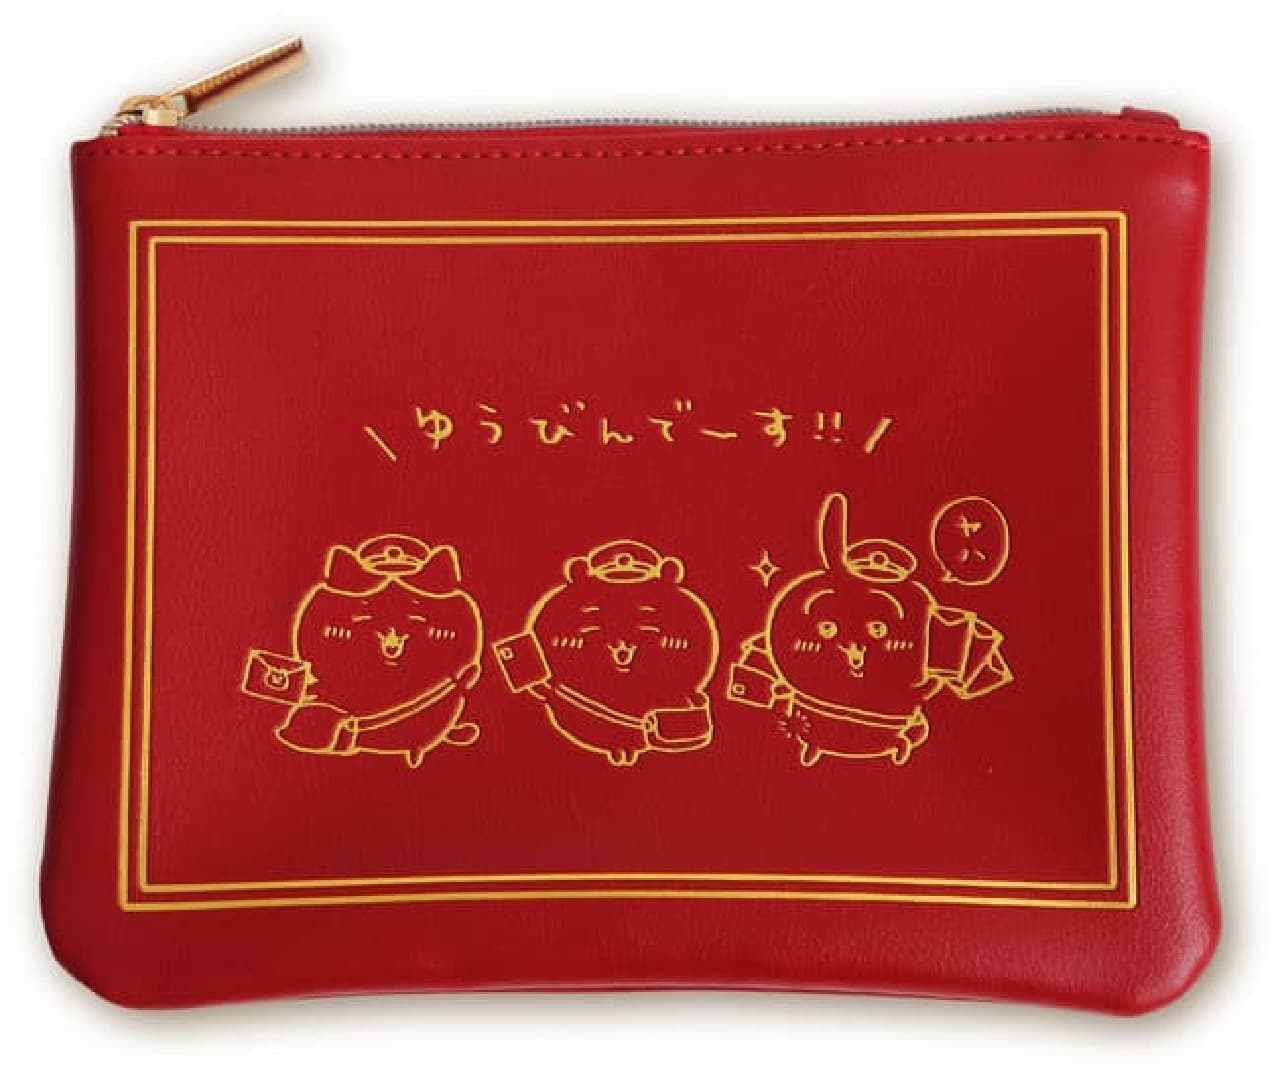 Post office Chiikawa goods are now available--New Year's postcards, mochi mochi mochi plush toys, choshi charms, etc.